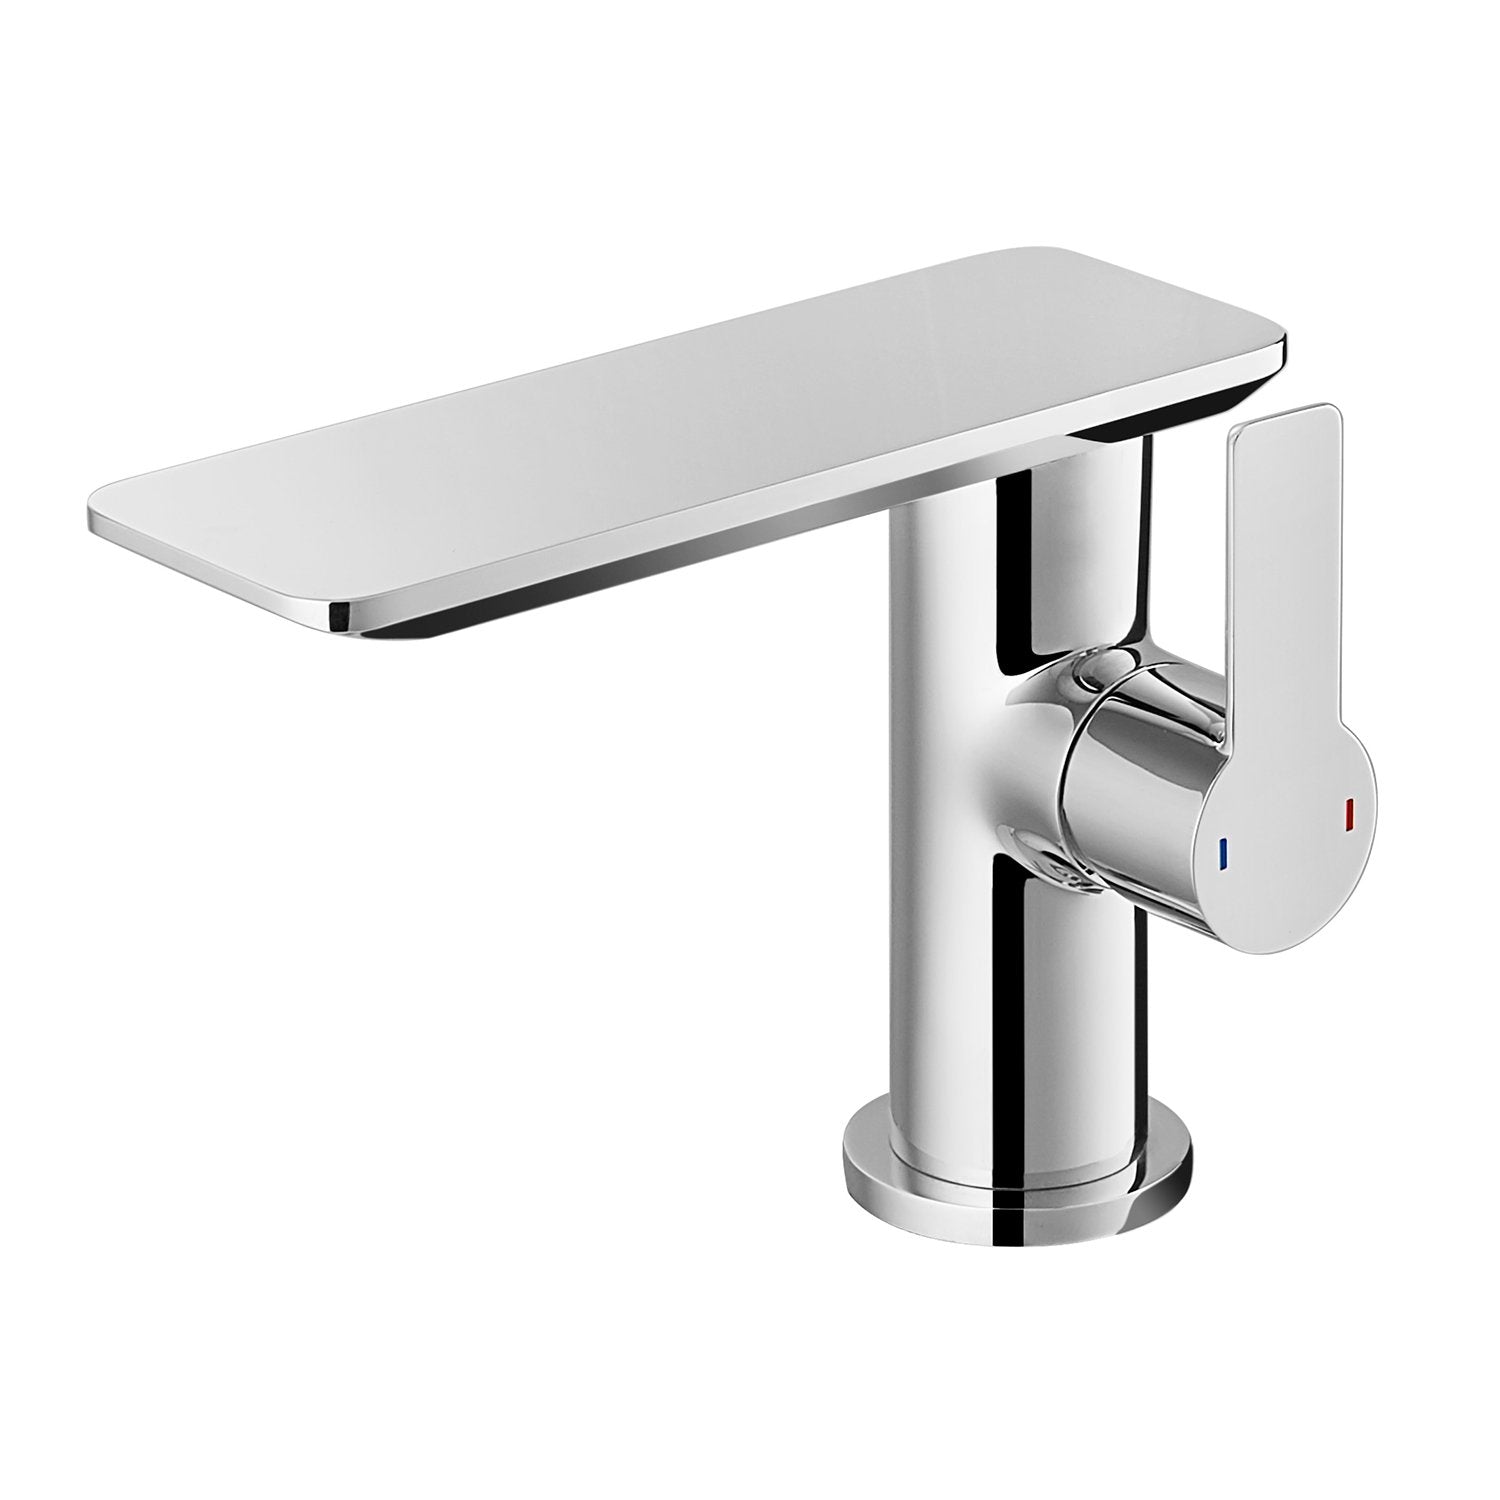 DAX Single Handle Bathroom Waterfall Faucet, Deck Mount, Brass Body, Brushed Nickel Finish, Spout Height 4-15/16 Inches (DAX-8205-BN)